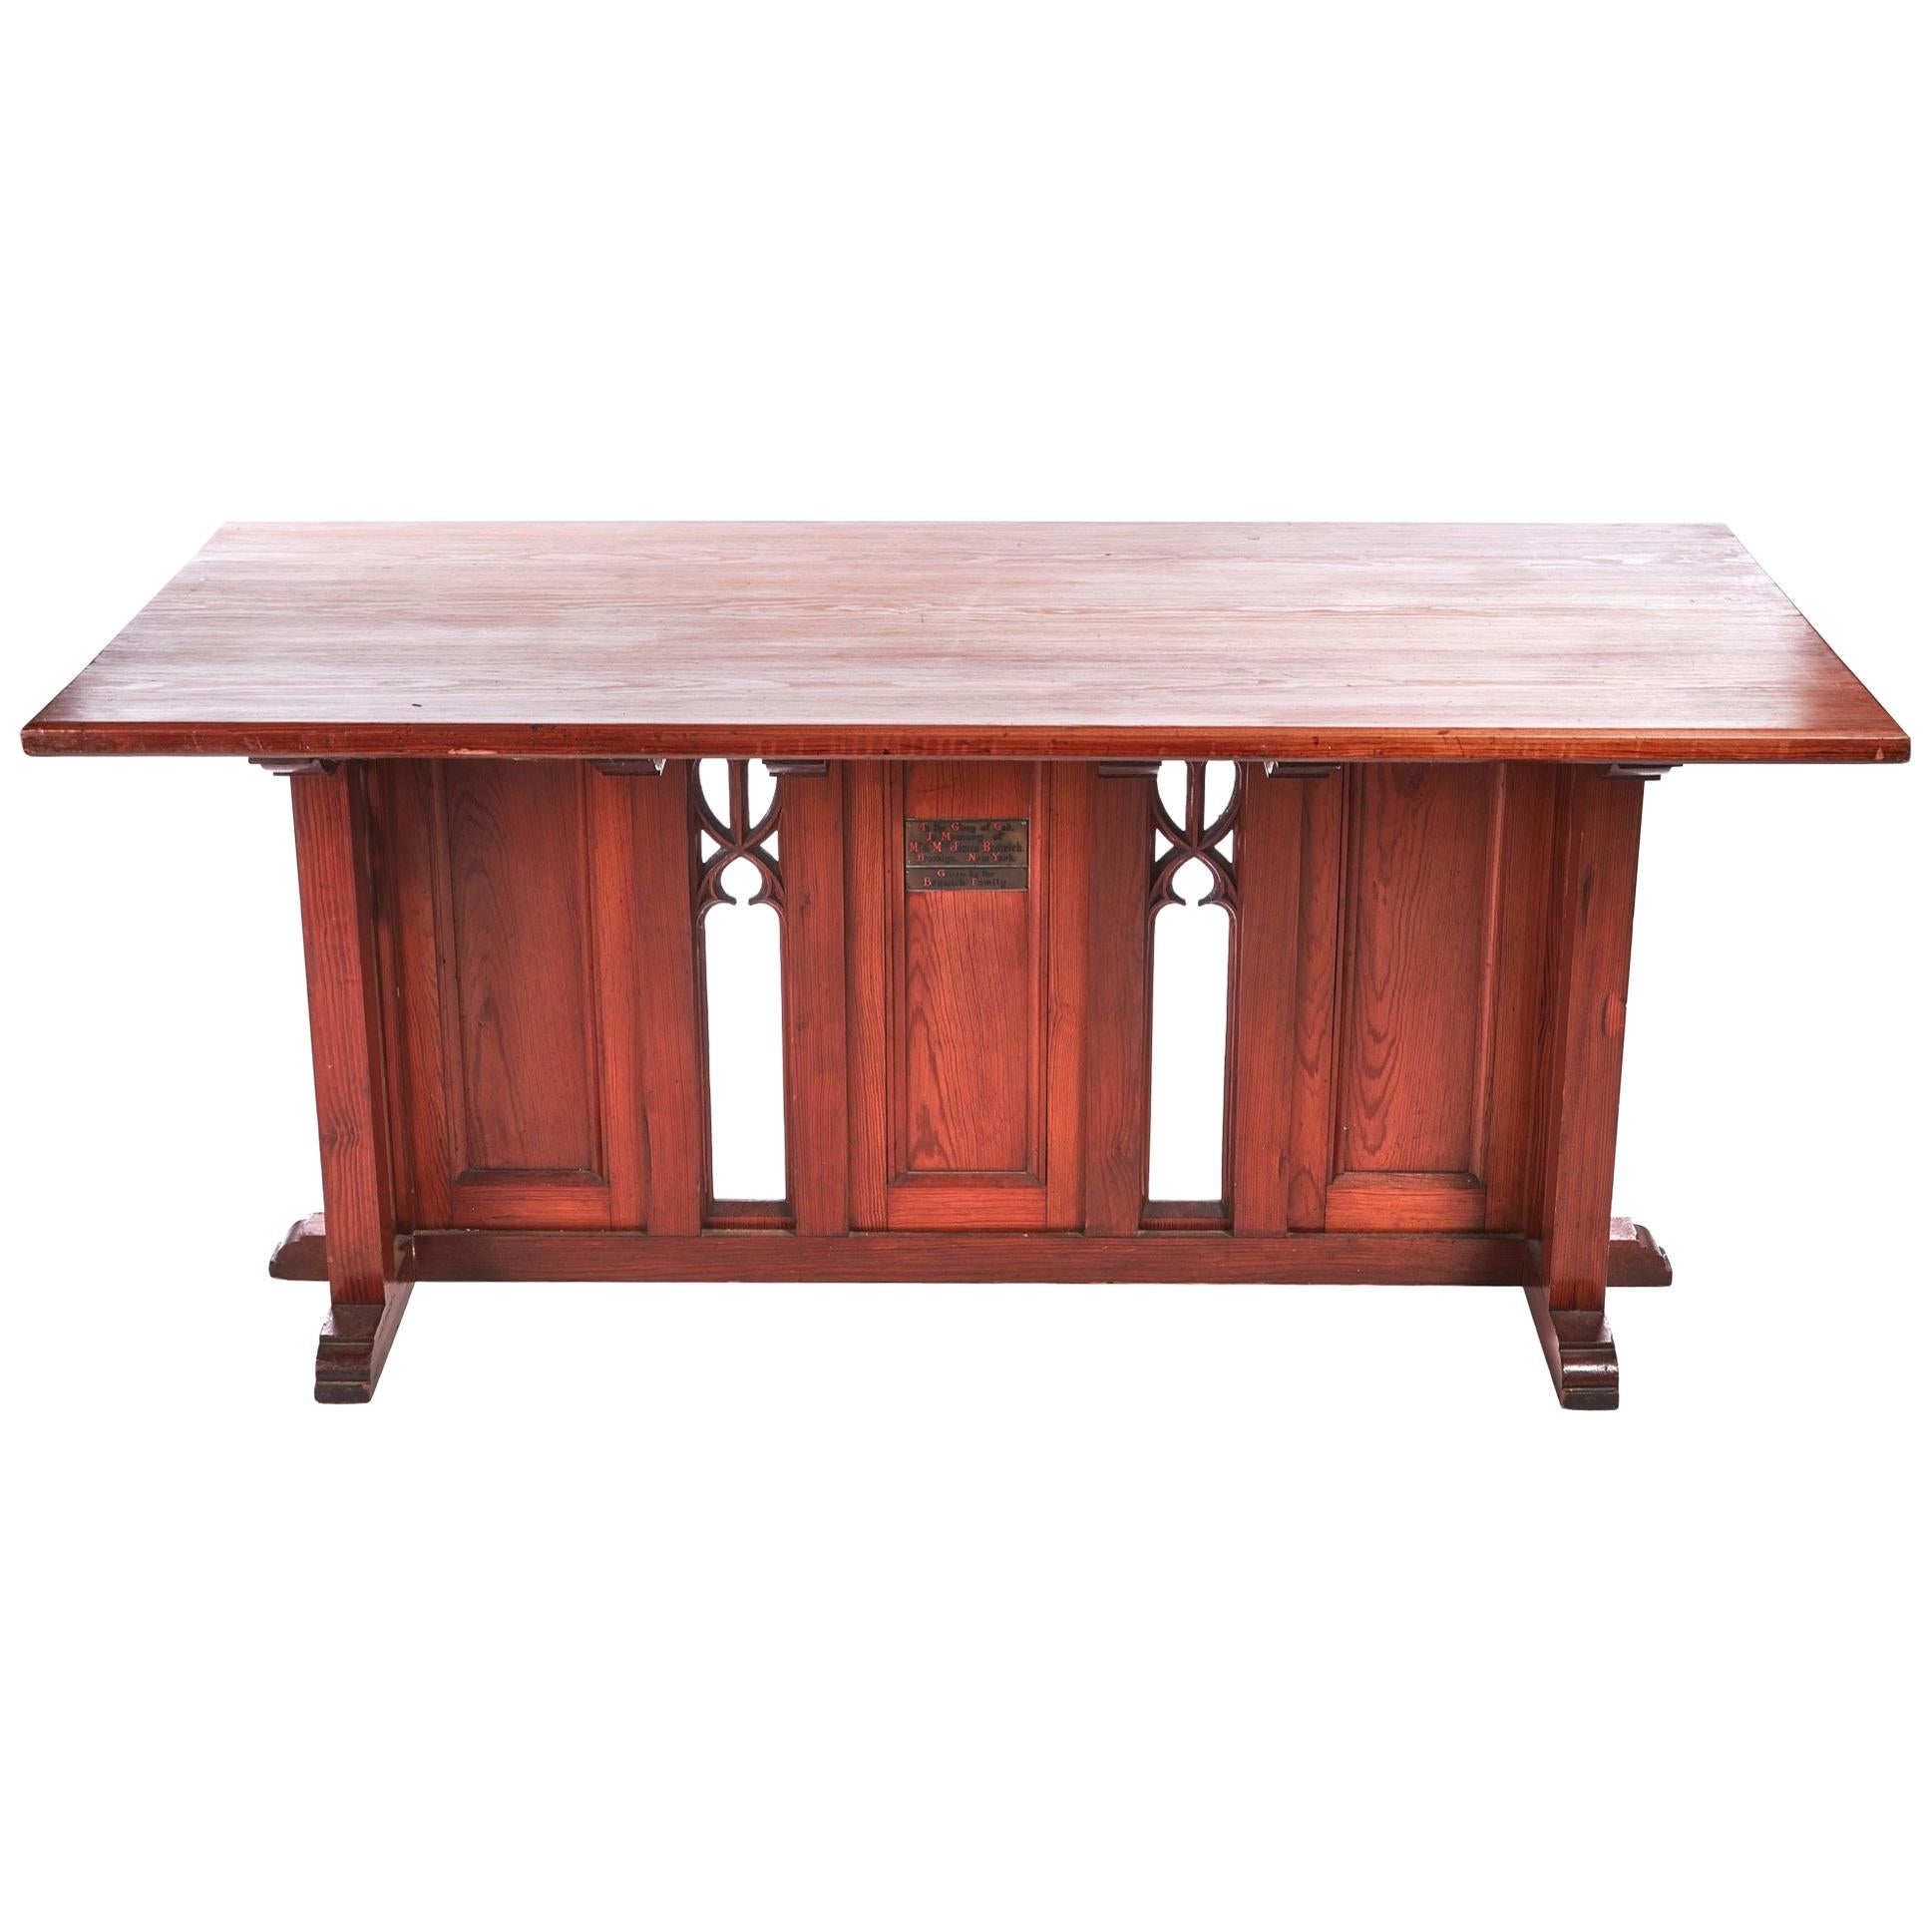 Fantastic Gothic Pitch Pine Alter Table